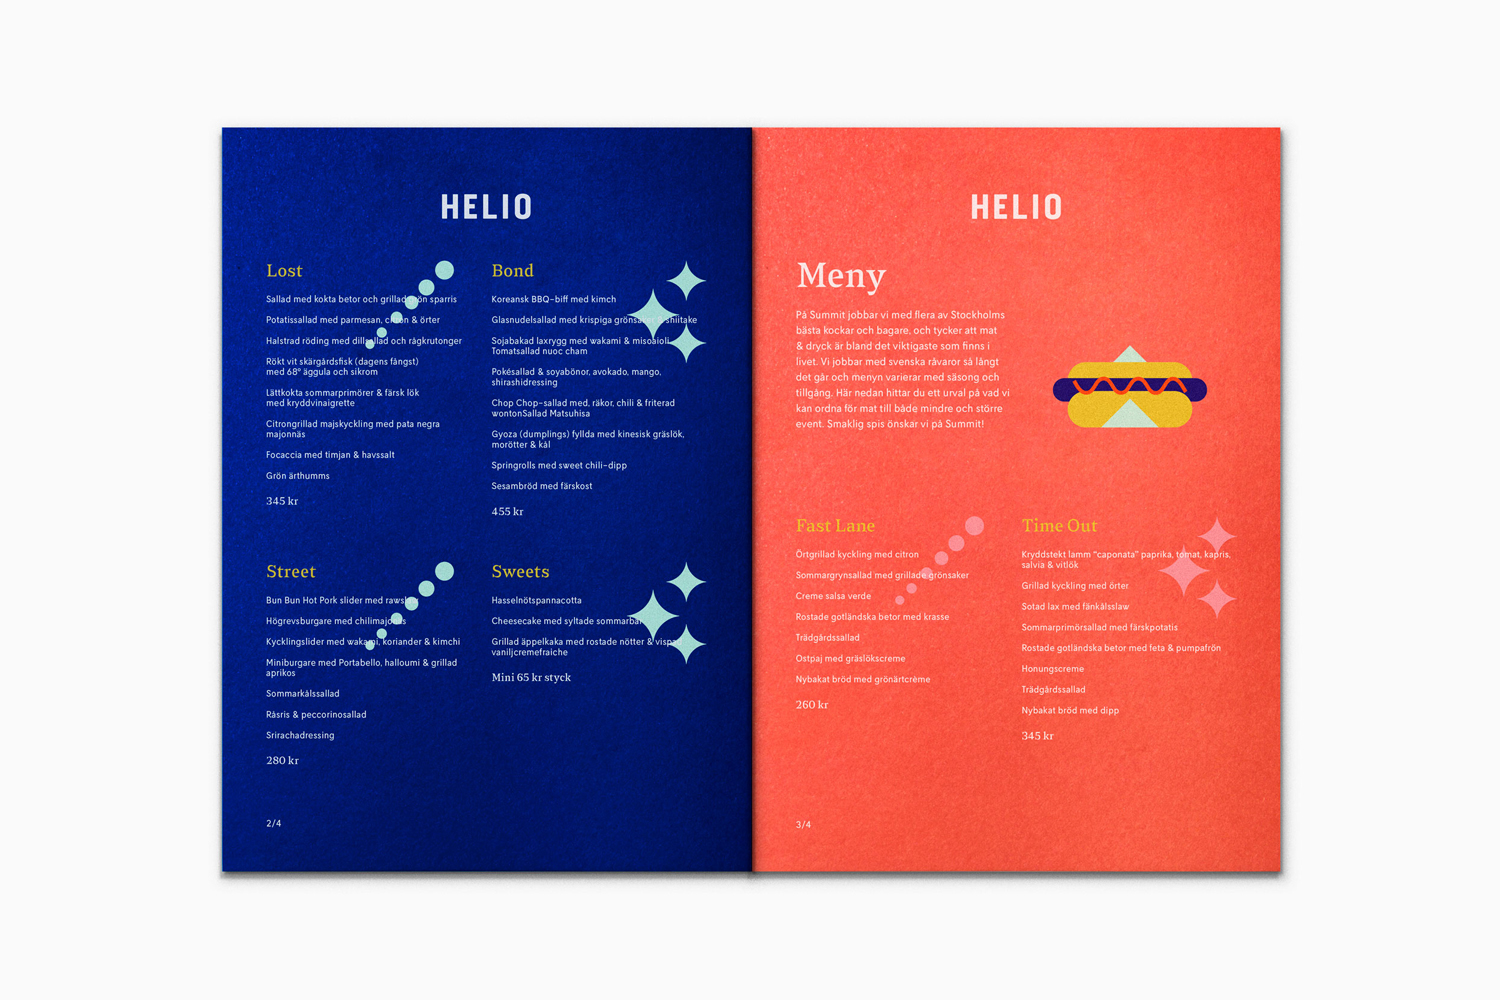 Logo, illustration, animation and print by Bedow for Stockholm-based co-working space Helio